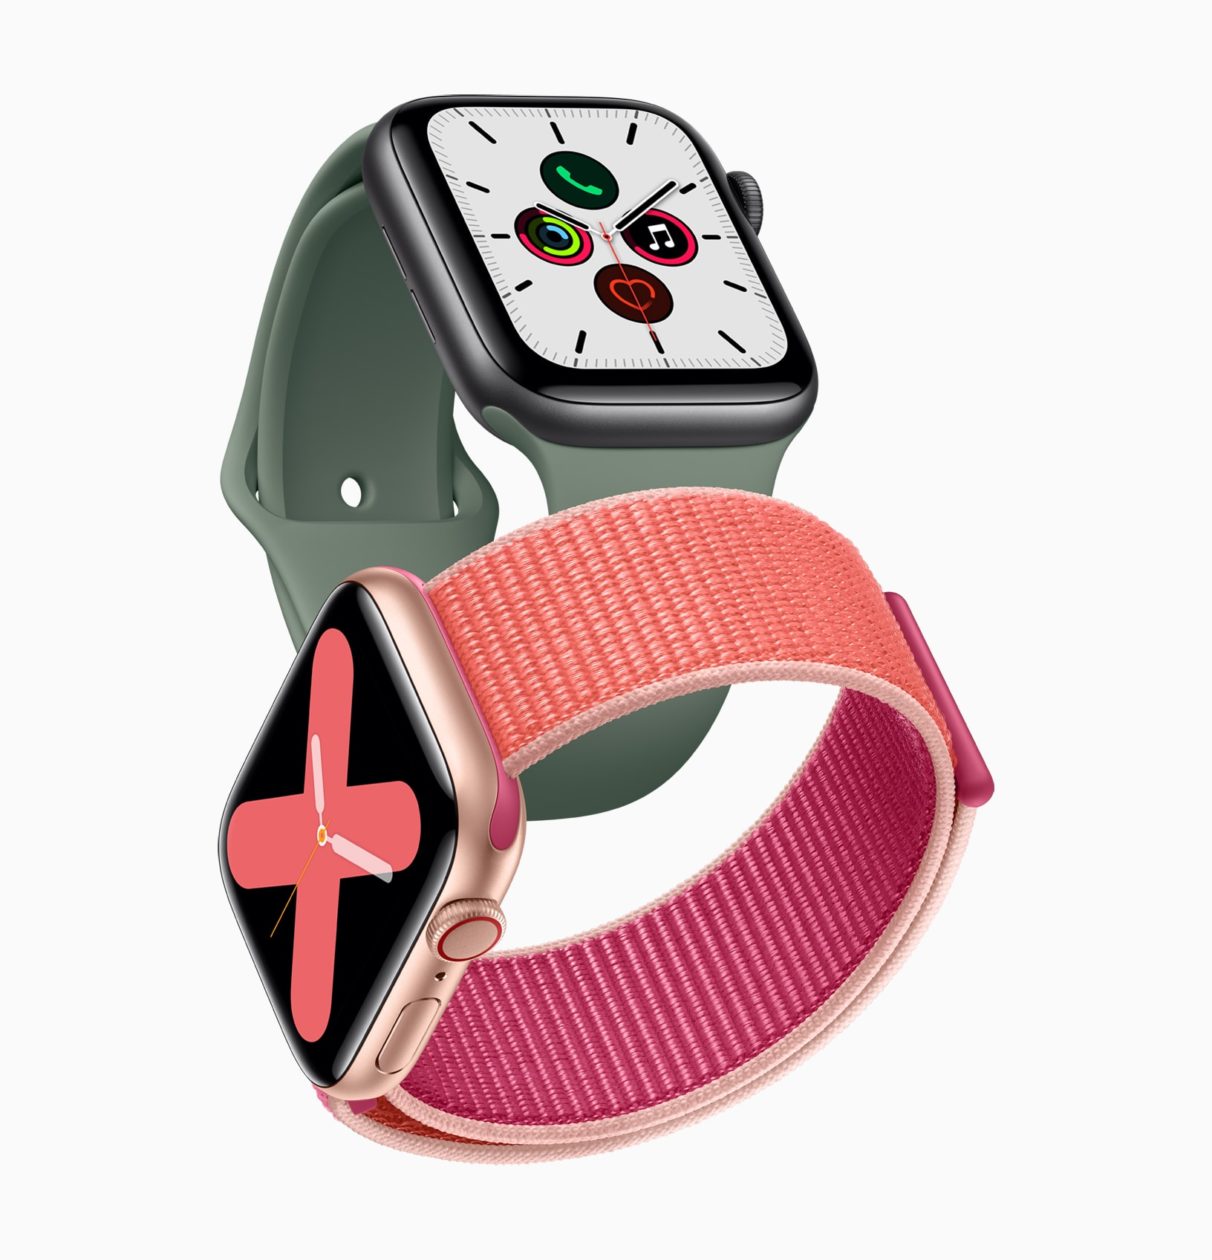 What’s new in the Apple Watch Series 5 compared to the Series 4?